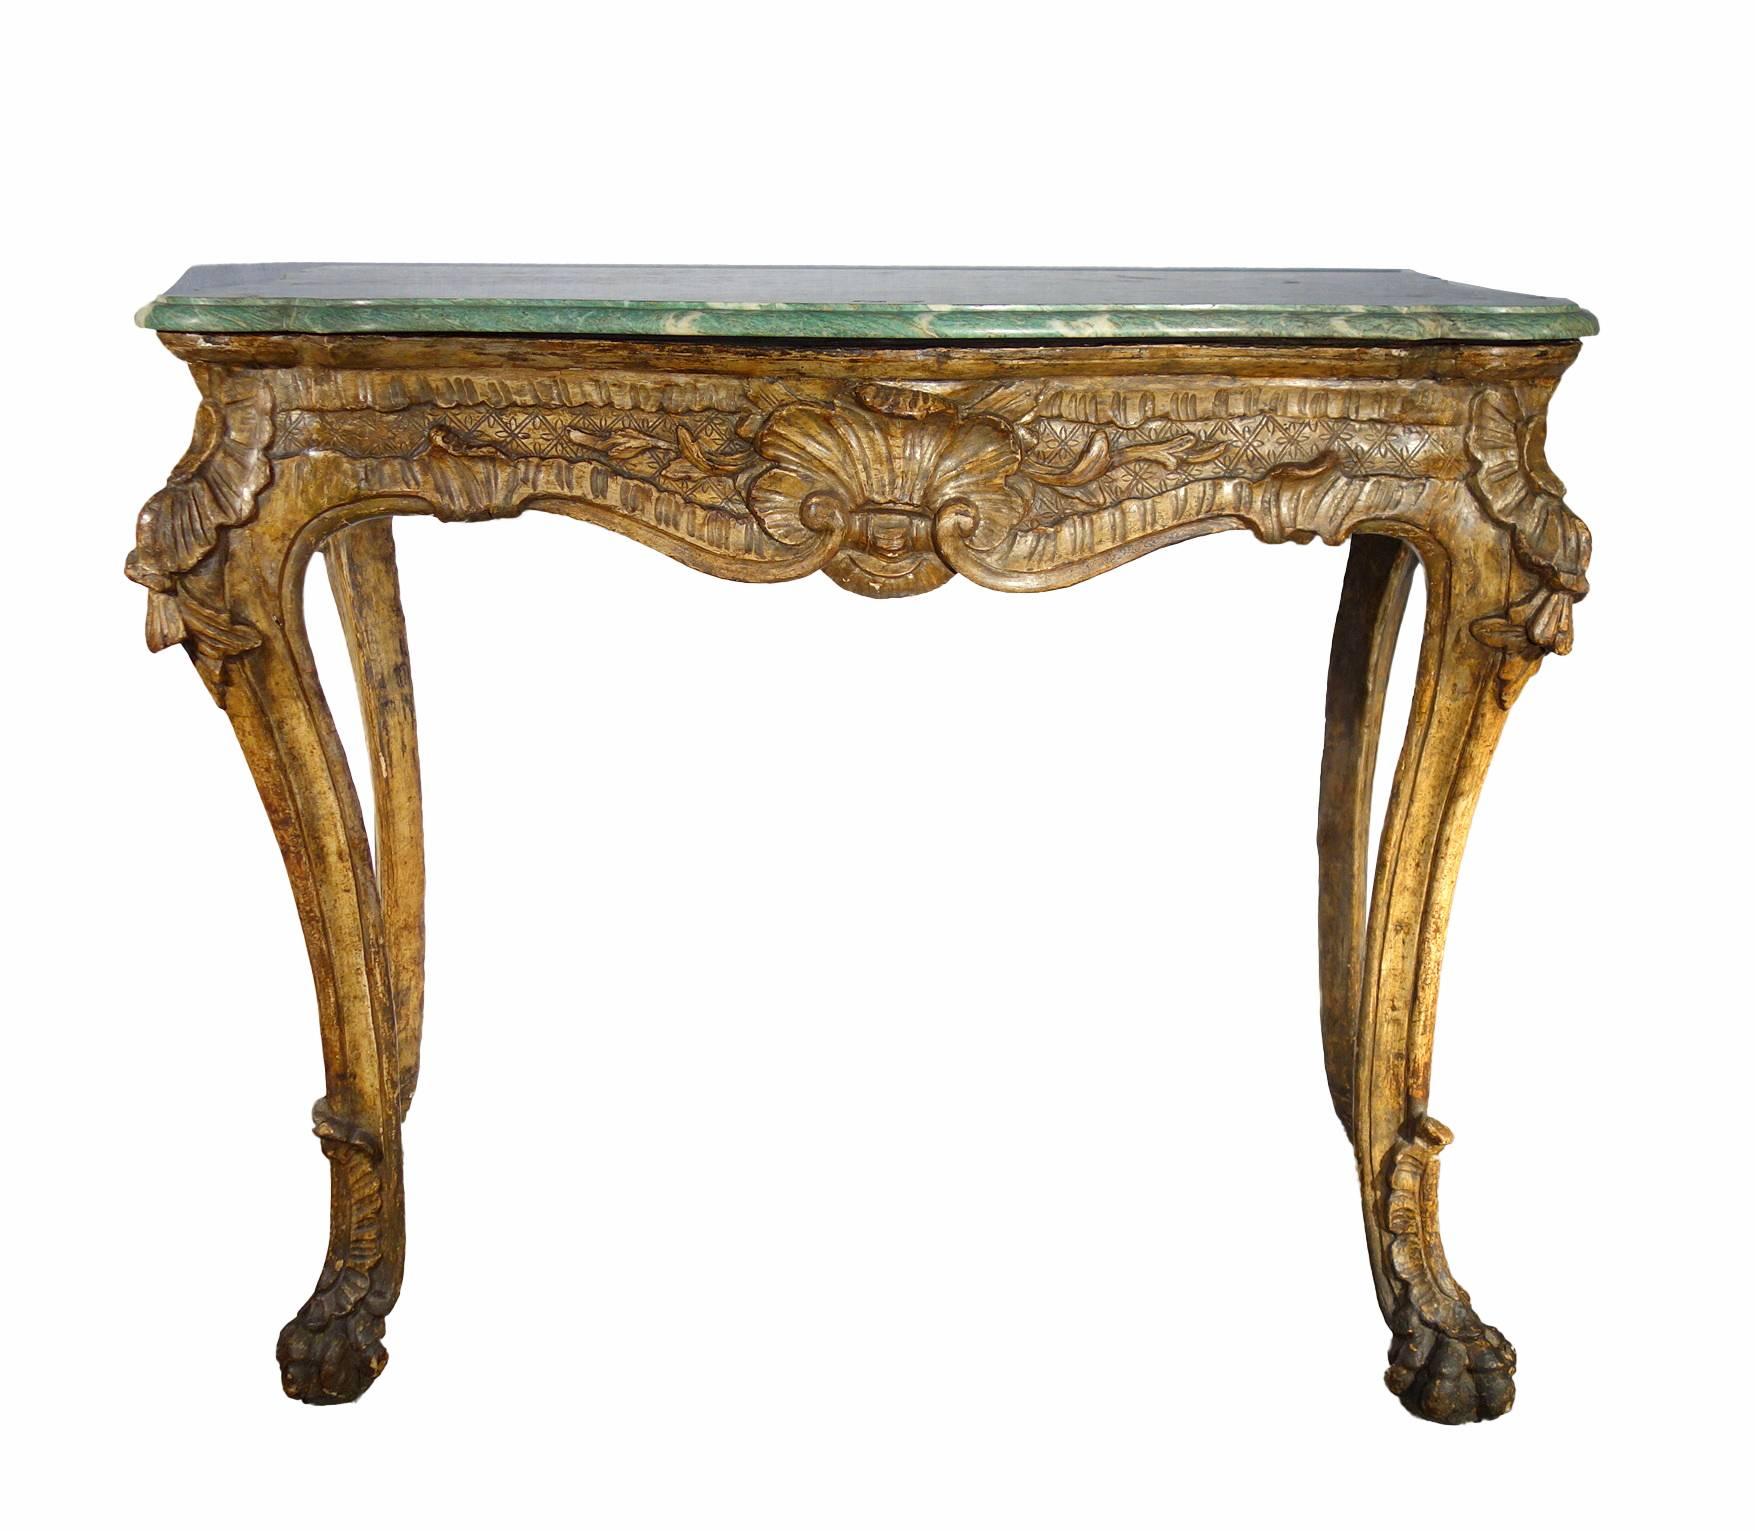 Deeply hand-carved baroque console table on four lion-feet legs gilded with the antique technique of 